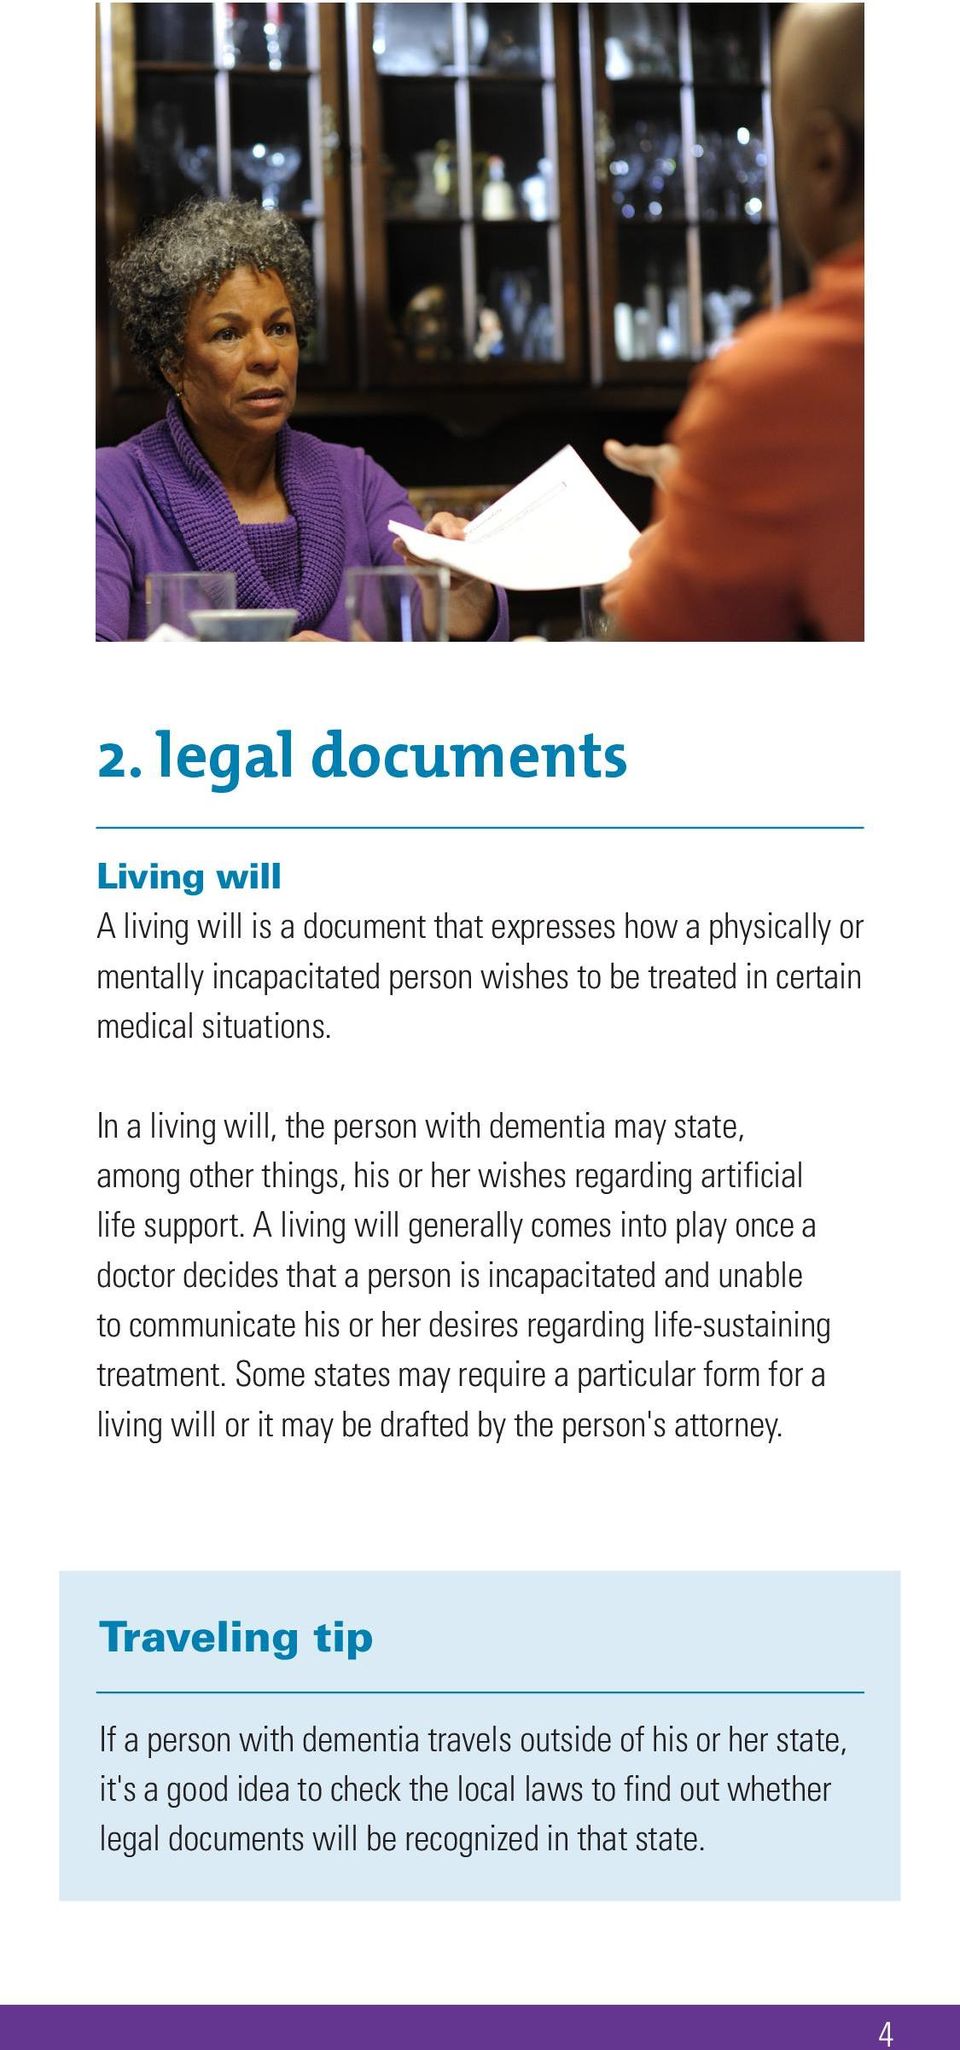 A living will generally comes into play once a doctor decides that a person is incapacitated and unable to communicate his or her desires regarding life-sustaining treatment.